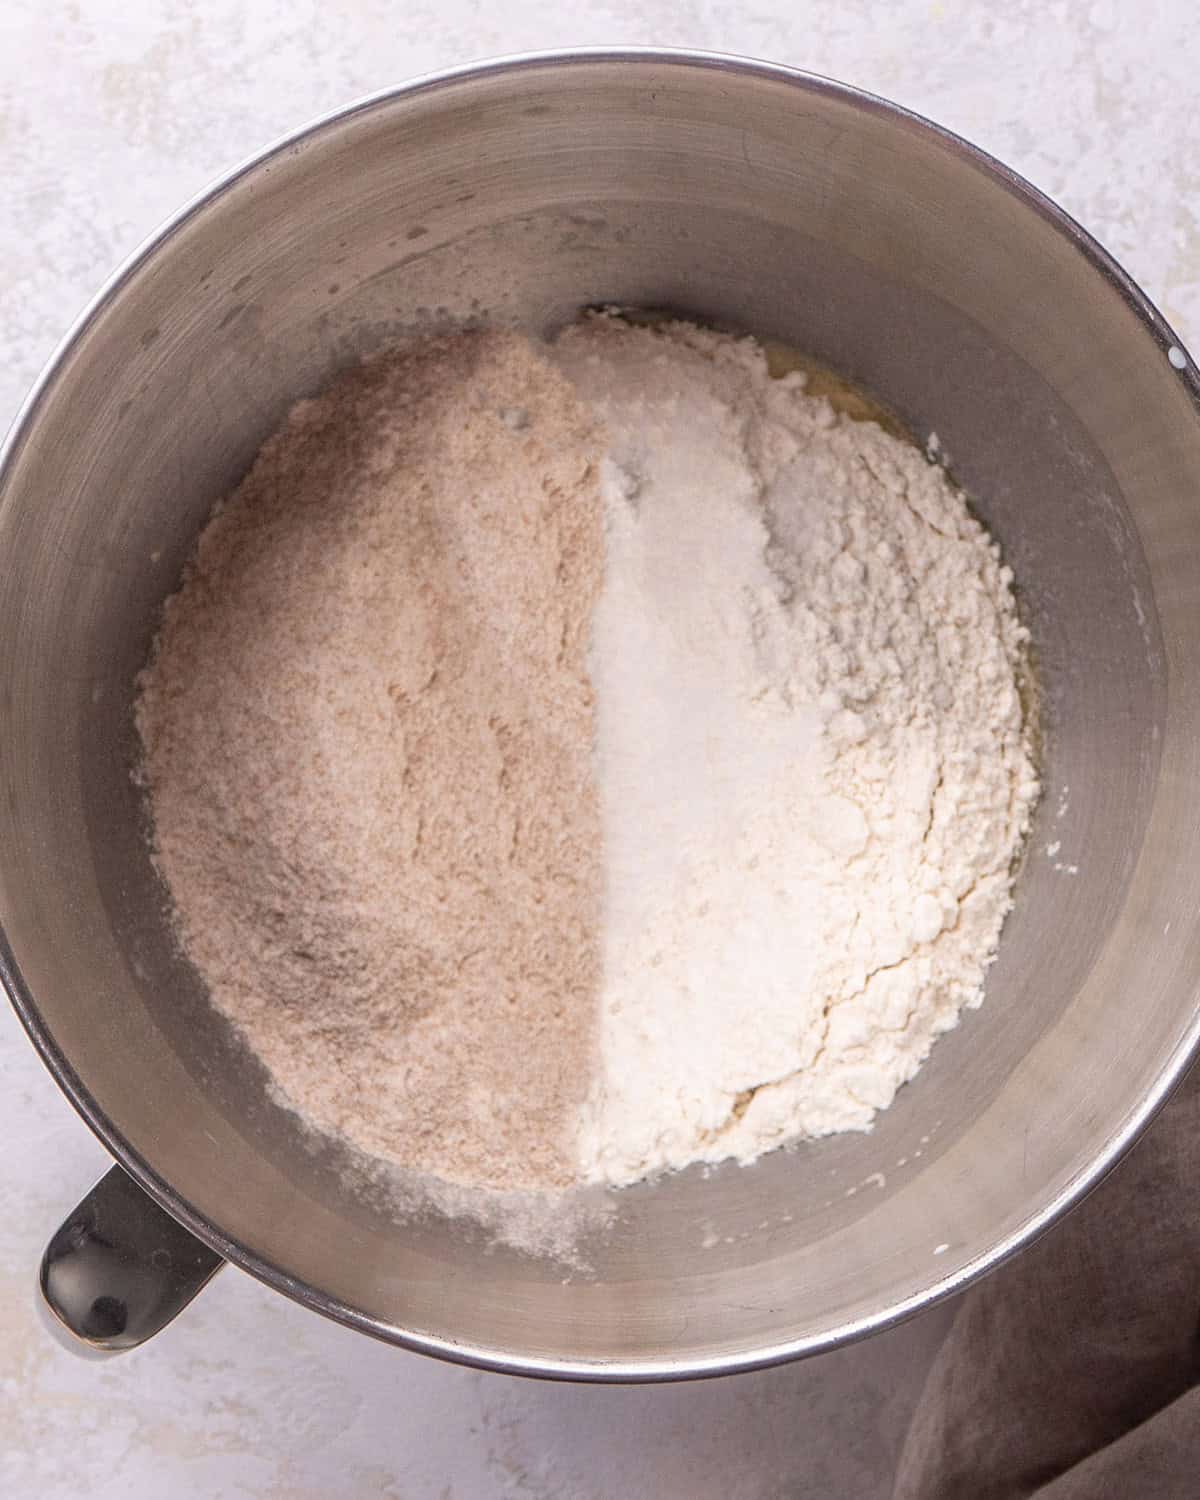 How to Make Honey Wheat Bread - adding ingredients to proofed yeast